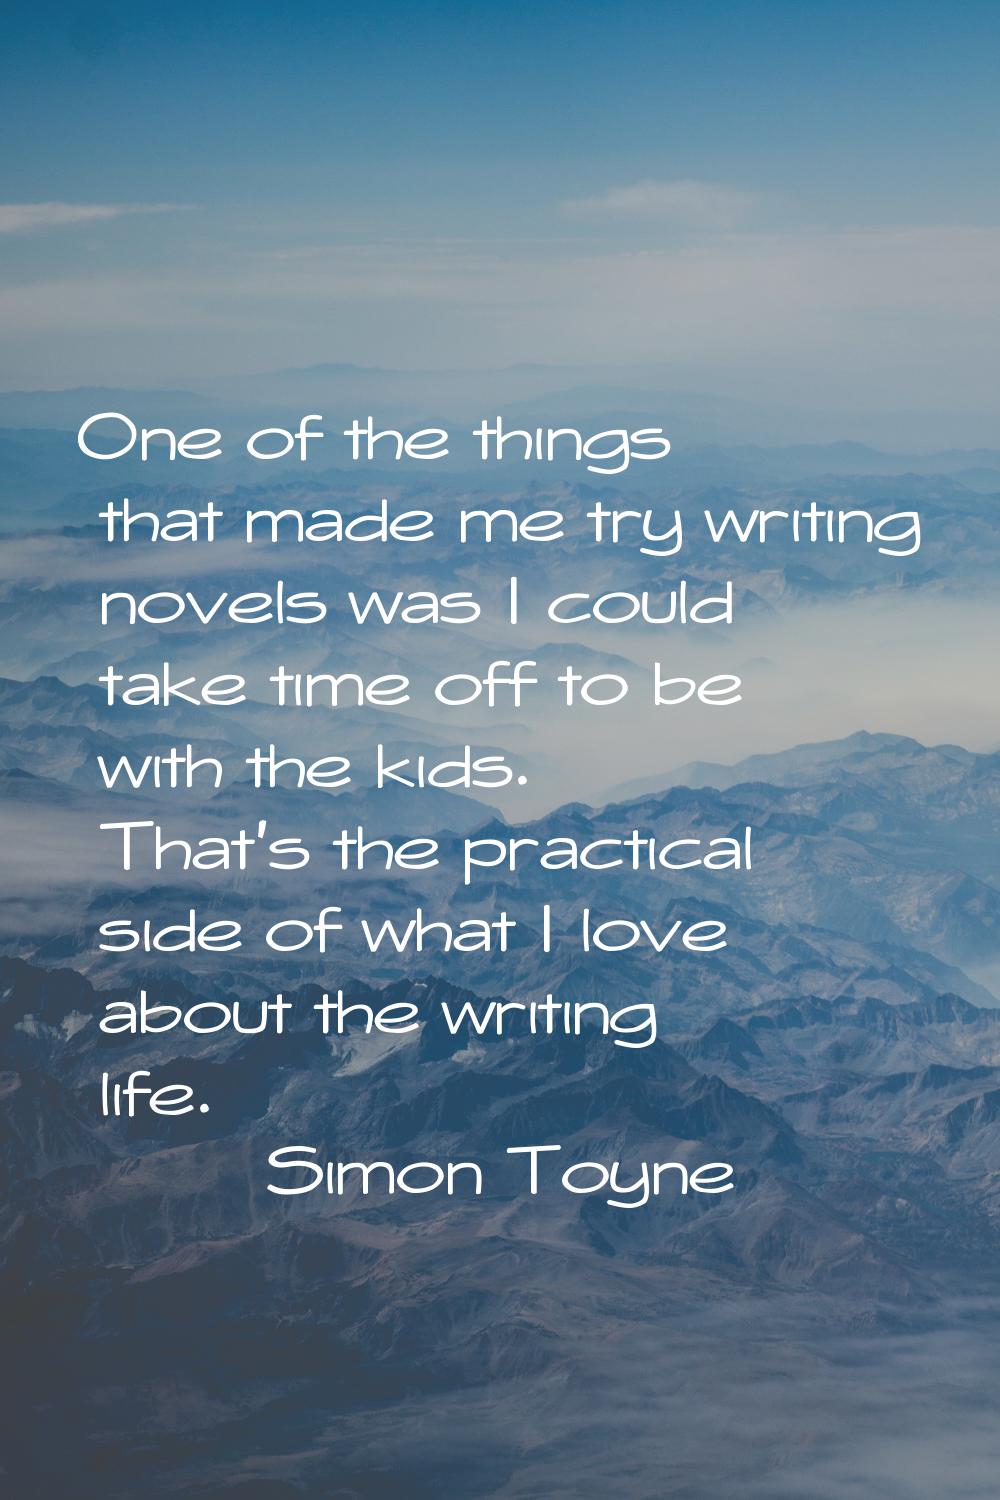 One of the things that made me try writing novels was I could take time off to be with the kids. Th